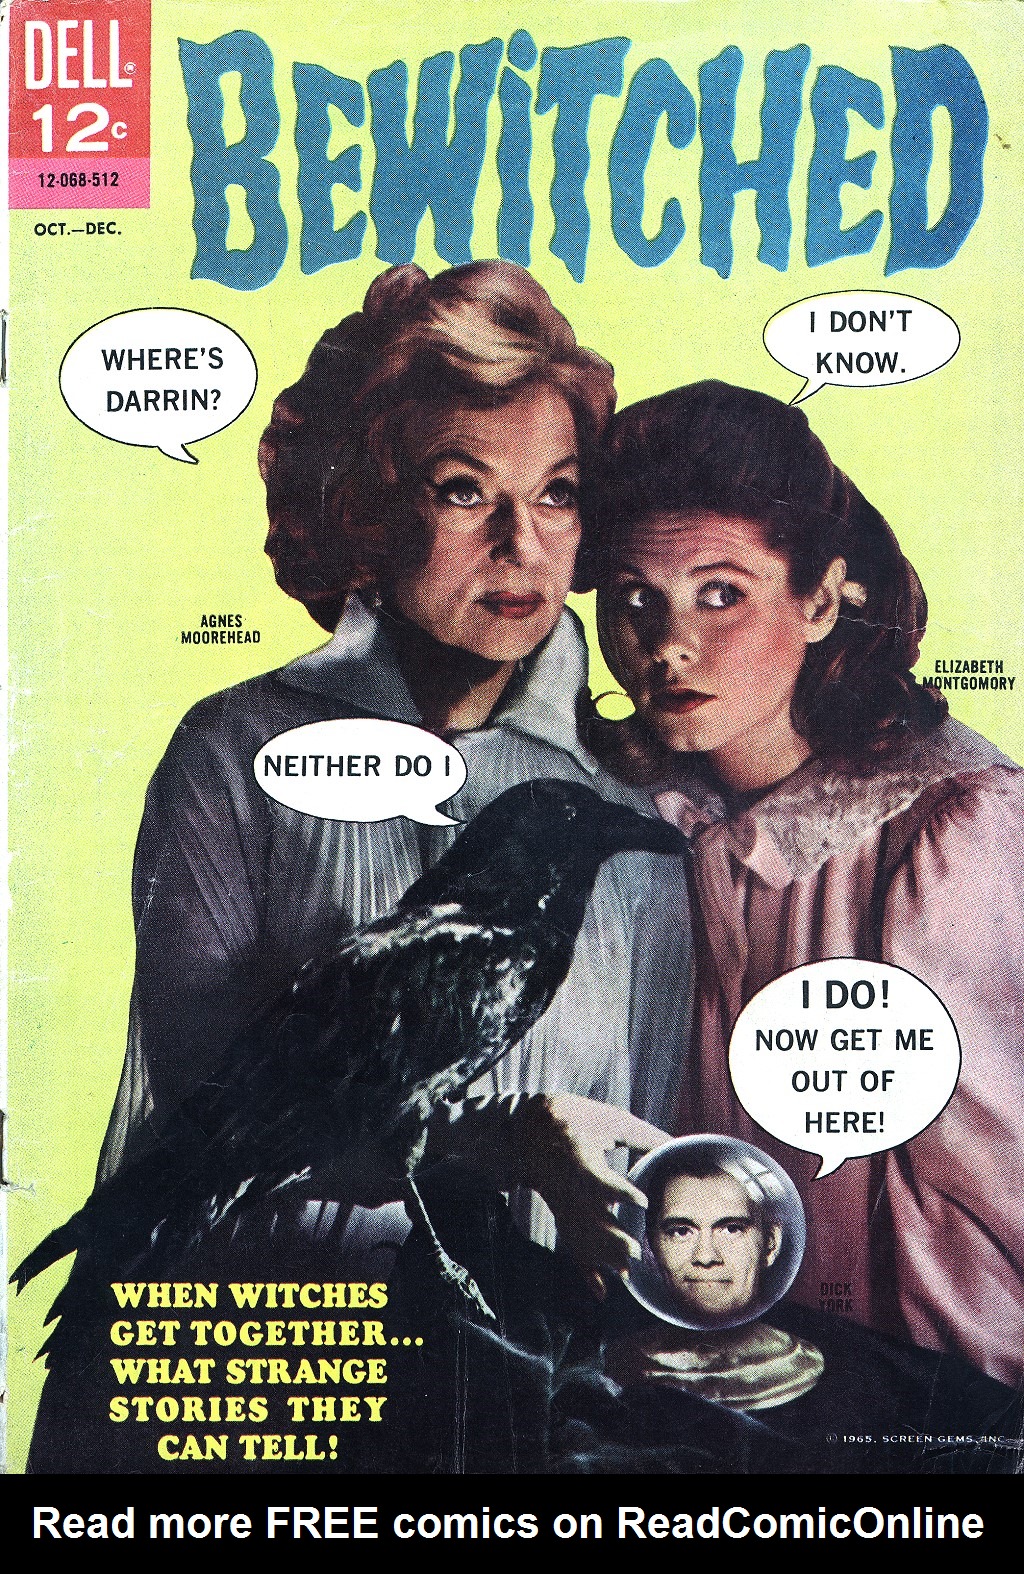 Bewitched Issue 3 | Read Bewitched Issue 3 comic online in high quality.  Read Full Comic online for free - Read comics online in high quality  .|viewcomiconline.com